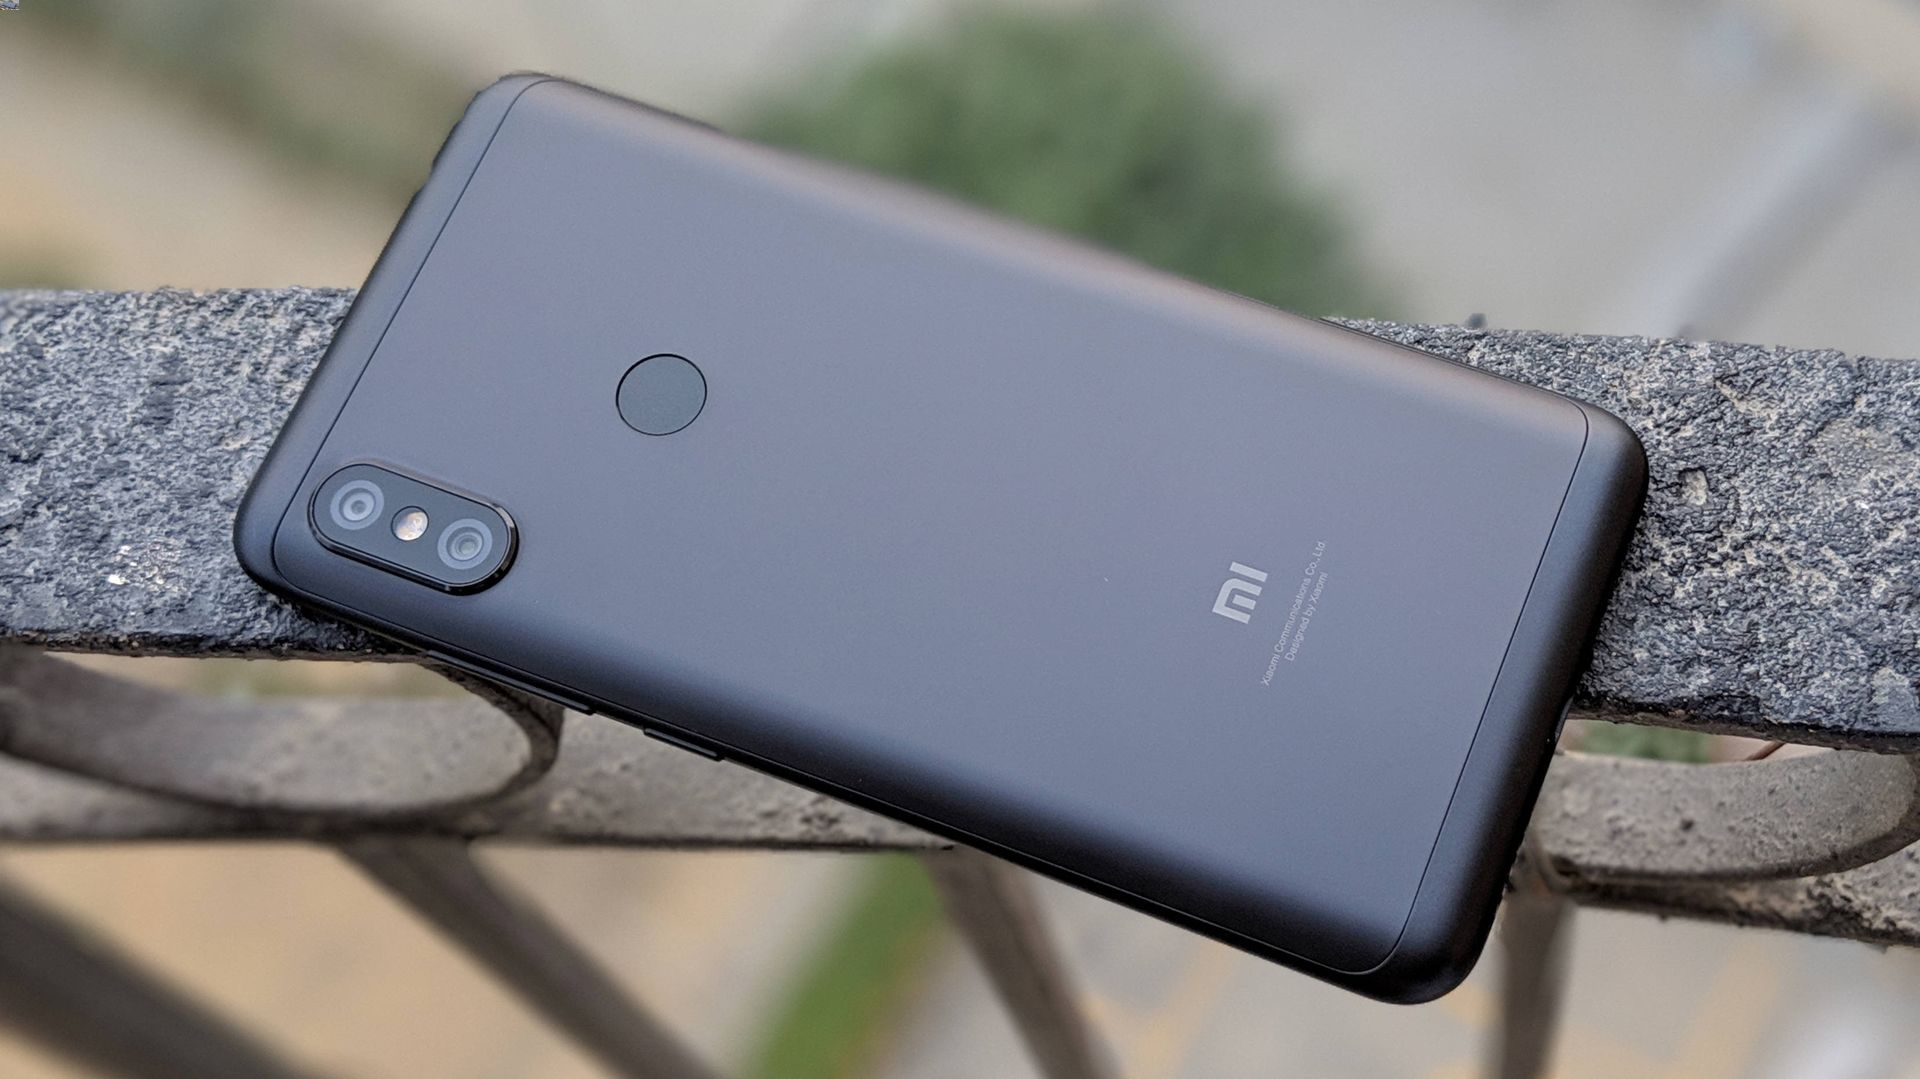 what-is-the-resolution-of-the-xiaomi-redmi-note-6-pro